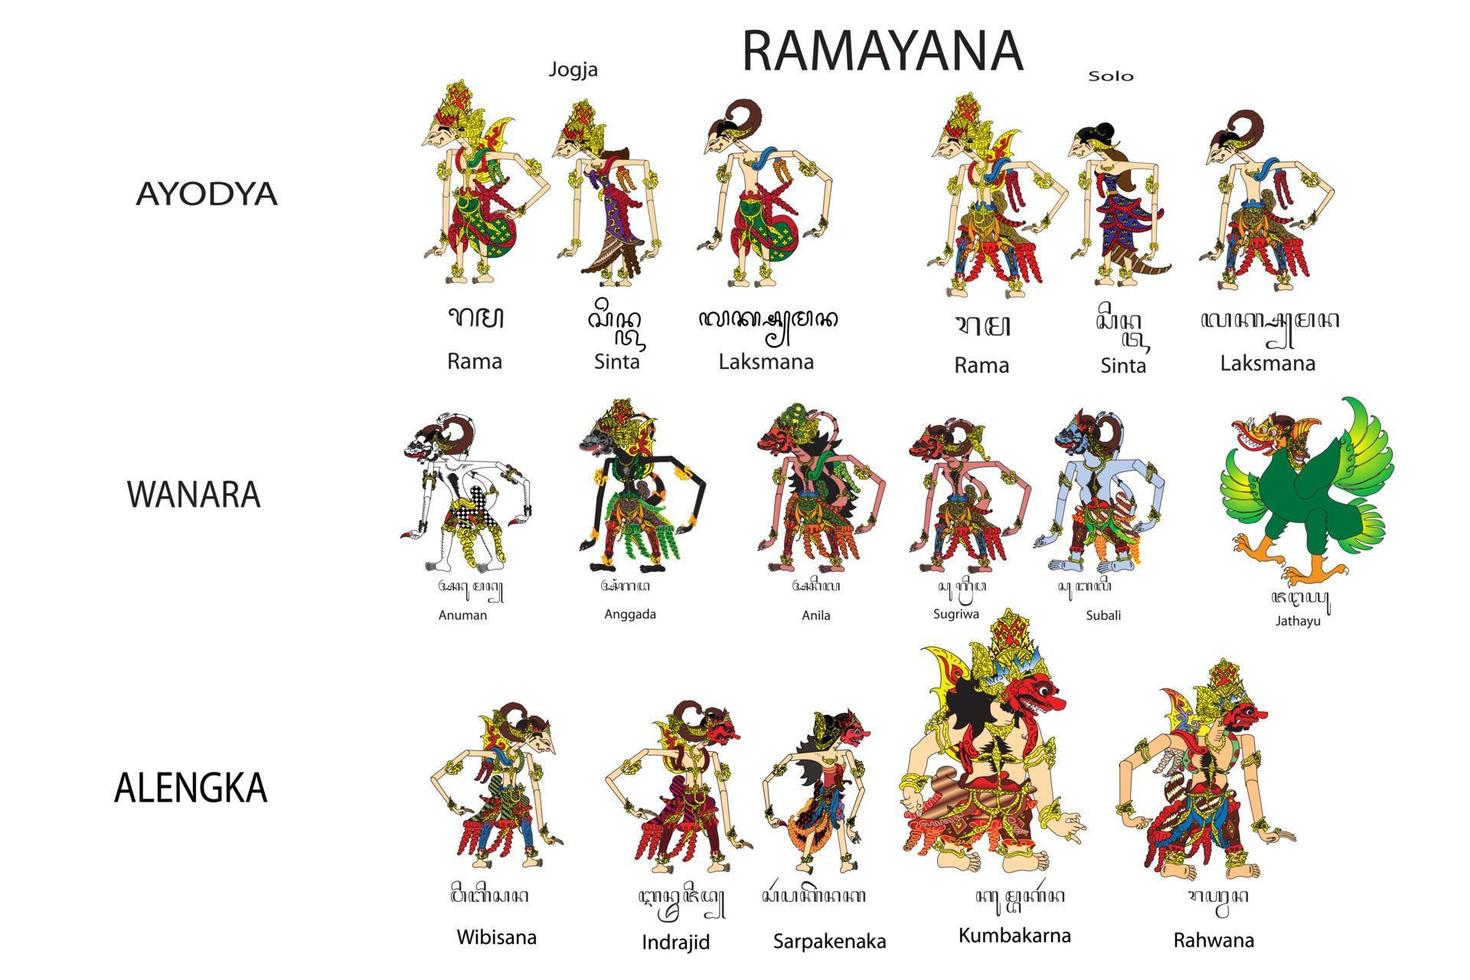 The image shows a chart of the characters in the Ramayana, a Hindu epic poem, as depicted in the Javanese wayang puppet tradition.